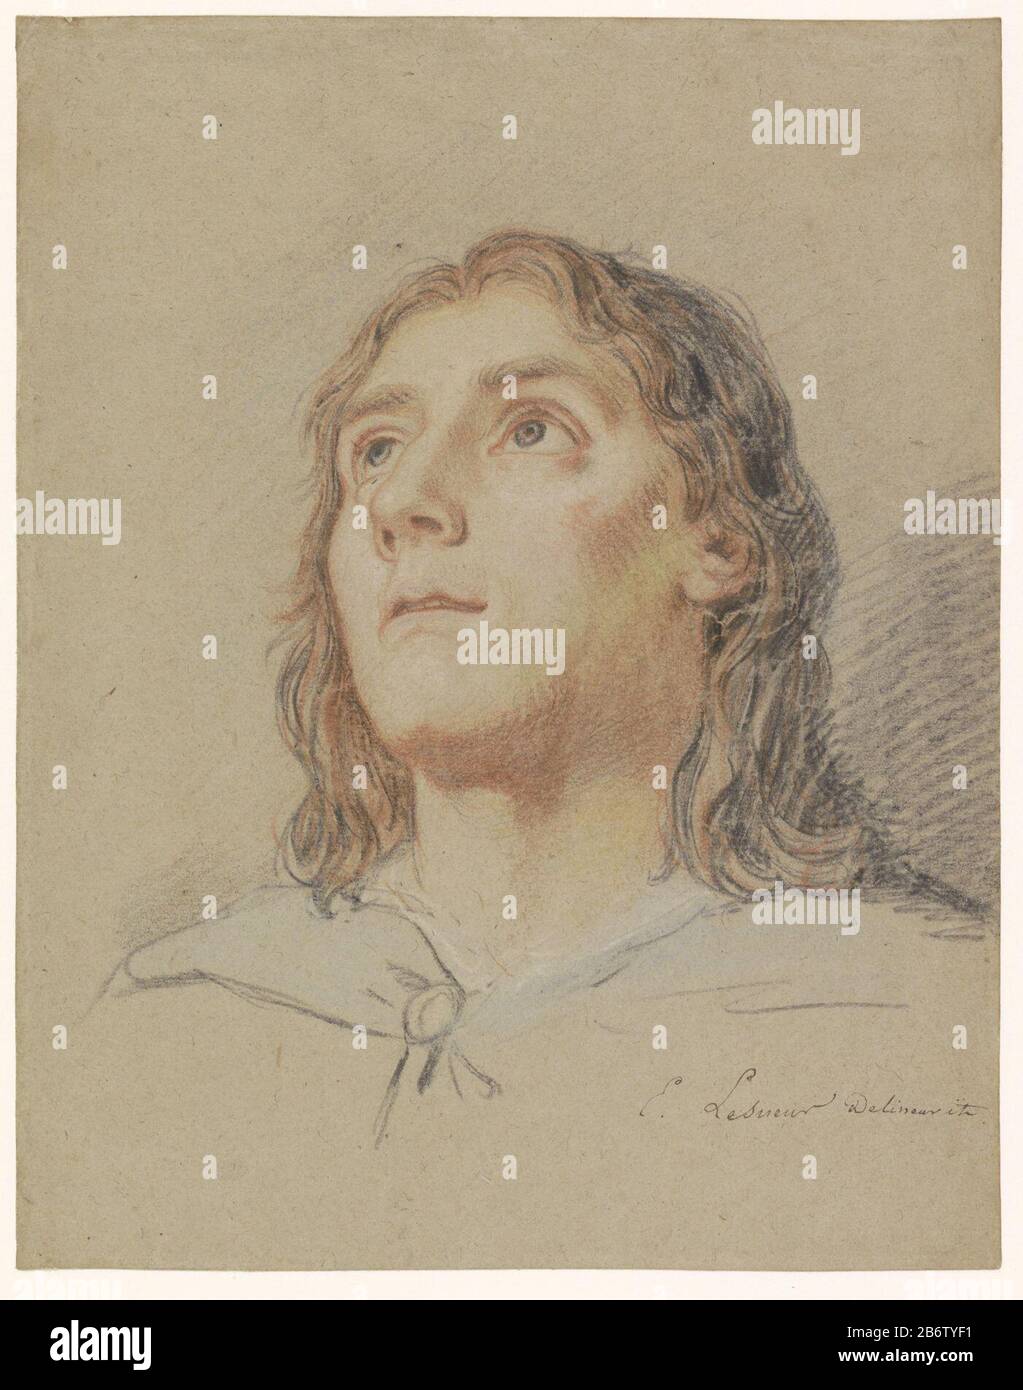 Hoofd van een opziende jongeling met lang haar Head of looking up Young man with long hair type of object: Drawing Object number: RP-T 1956-53 fabbricante : artista: Eustache Lesueur dating: 1626 - 1655 caratteristiche Fisiche: Gesso nero e colorato su carta grigia materiale: Gesso carta dimensioni: H 291 mm × L 228 mm Foto Stock